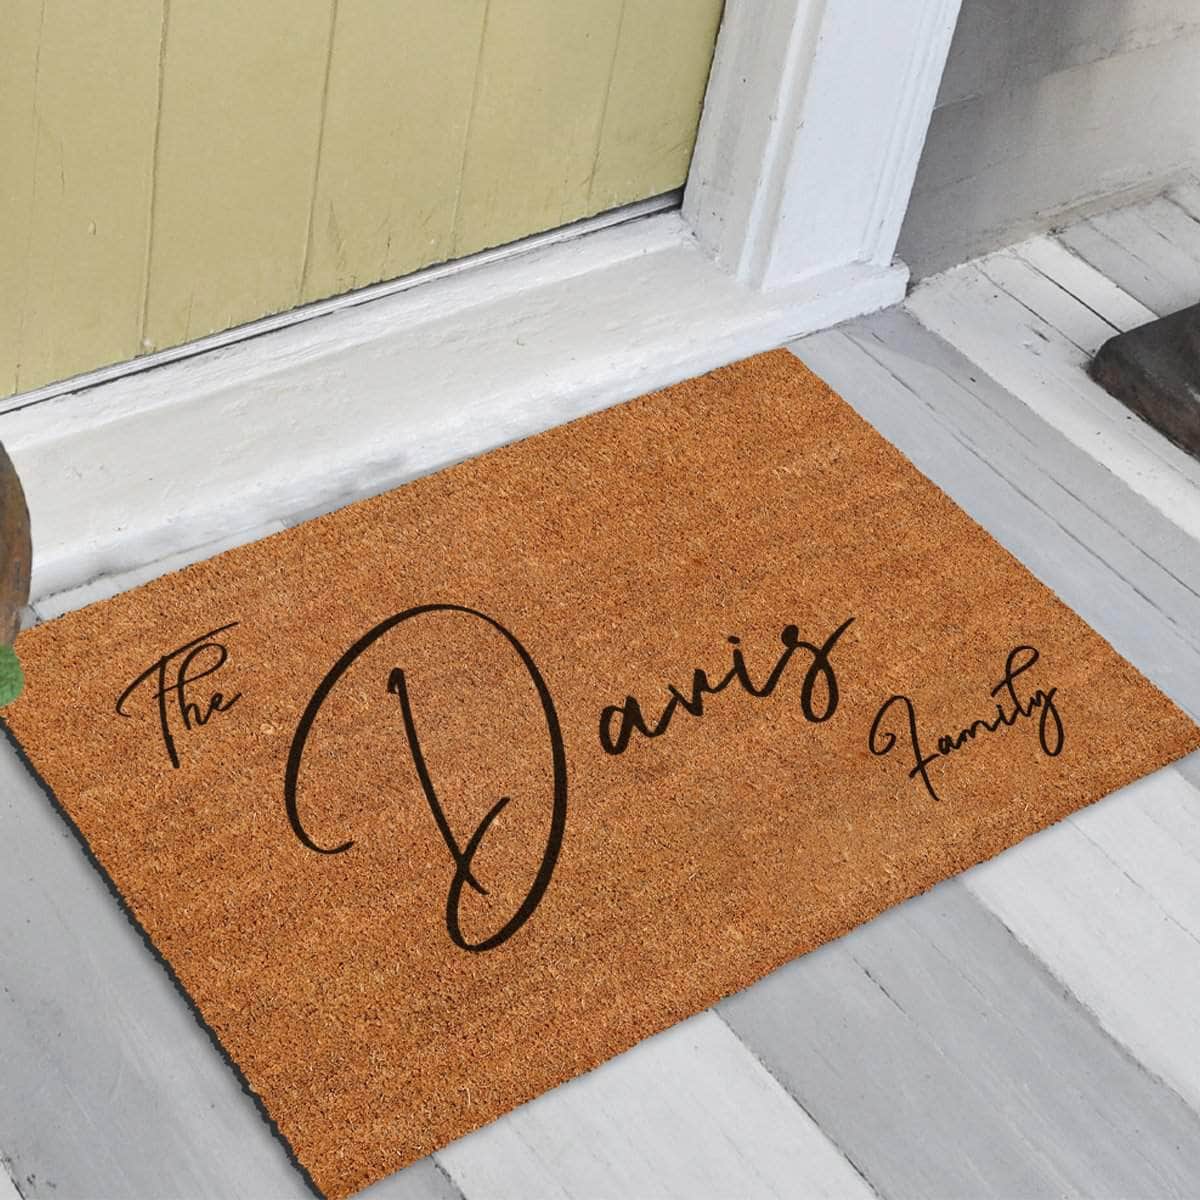 Customized Doormat With Family Name - Family Name Personalized Doormat